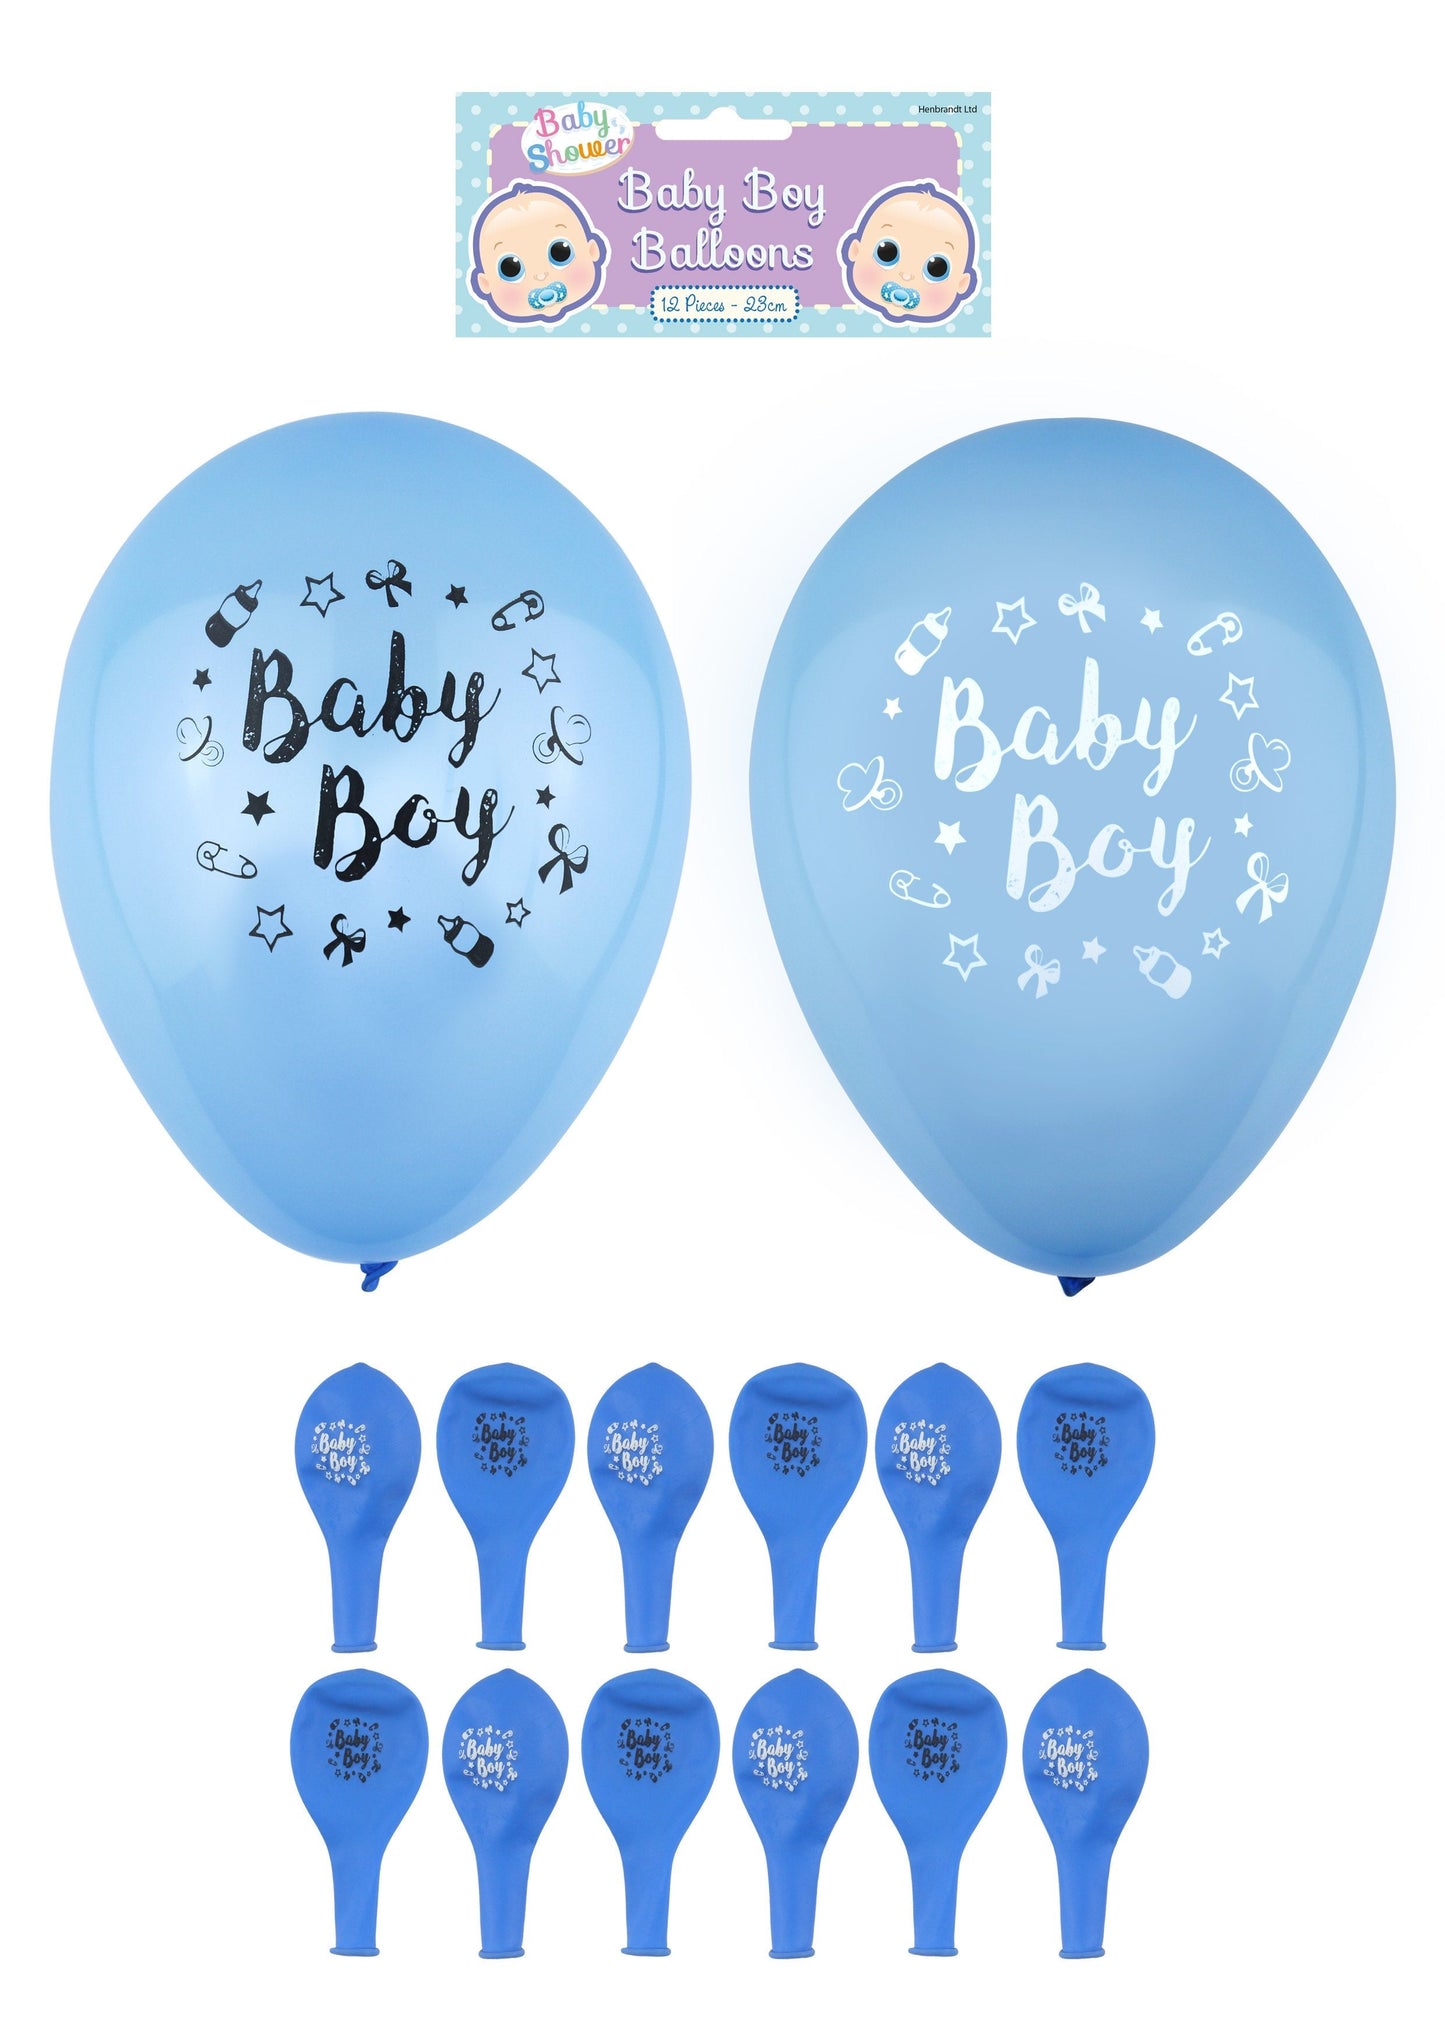 'Baby Boy' Party Birth Celebration Balloons Blue 23 cm X38745  A  (Large Letter Rate)